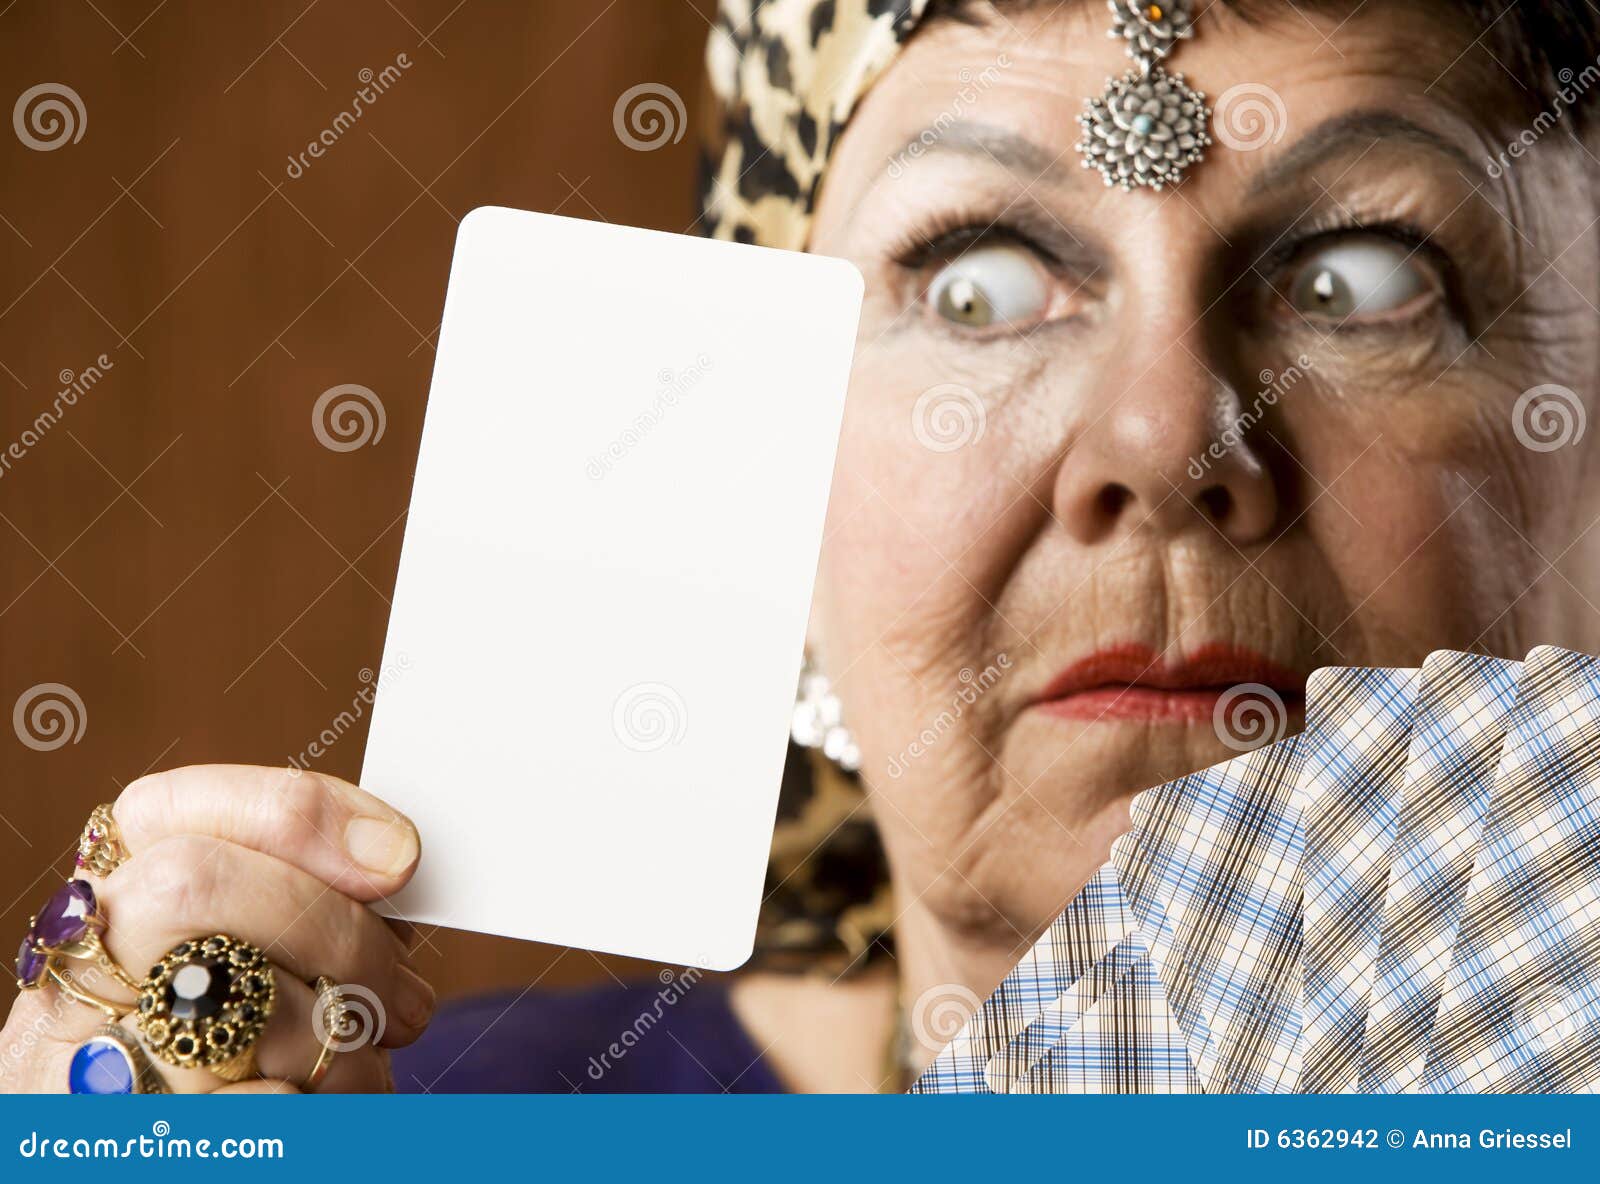 fortune teller with blank tarot card